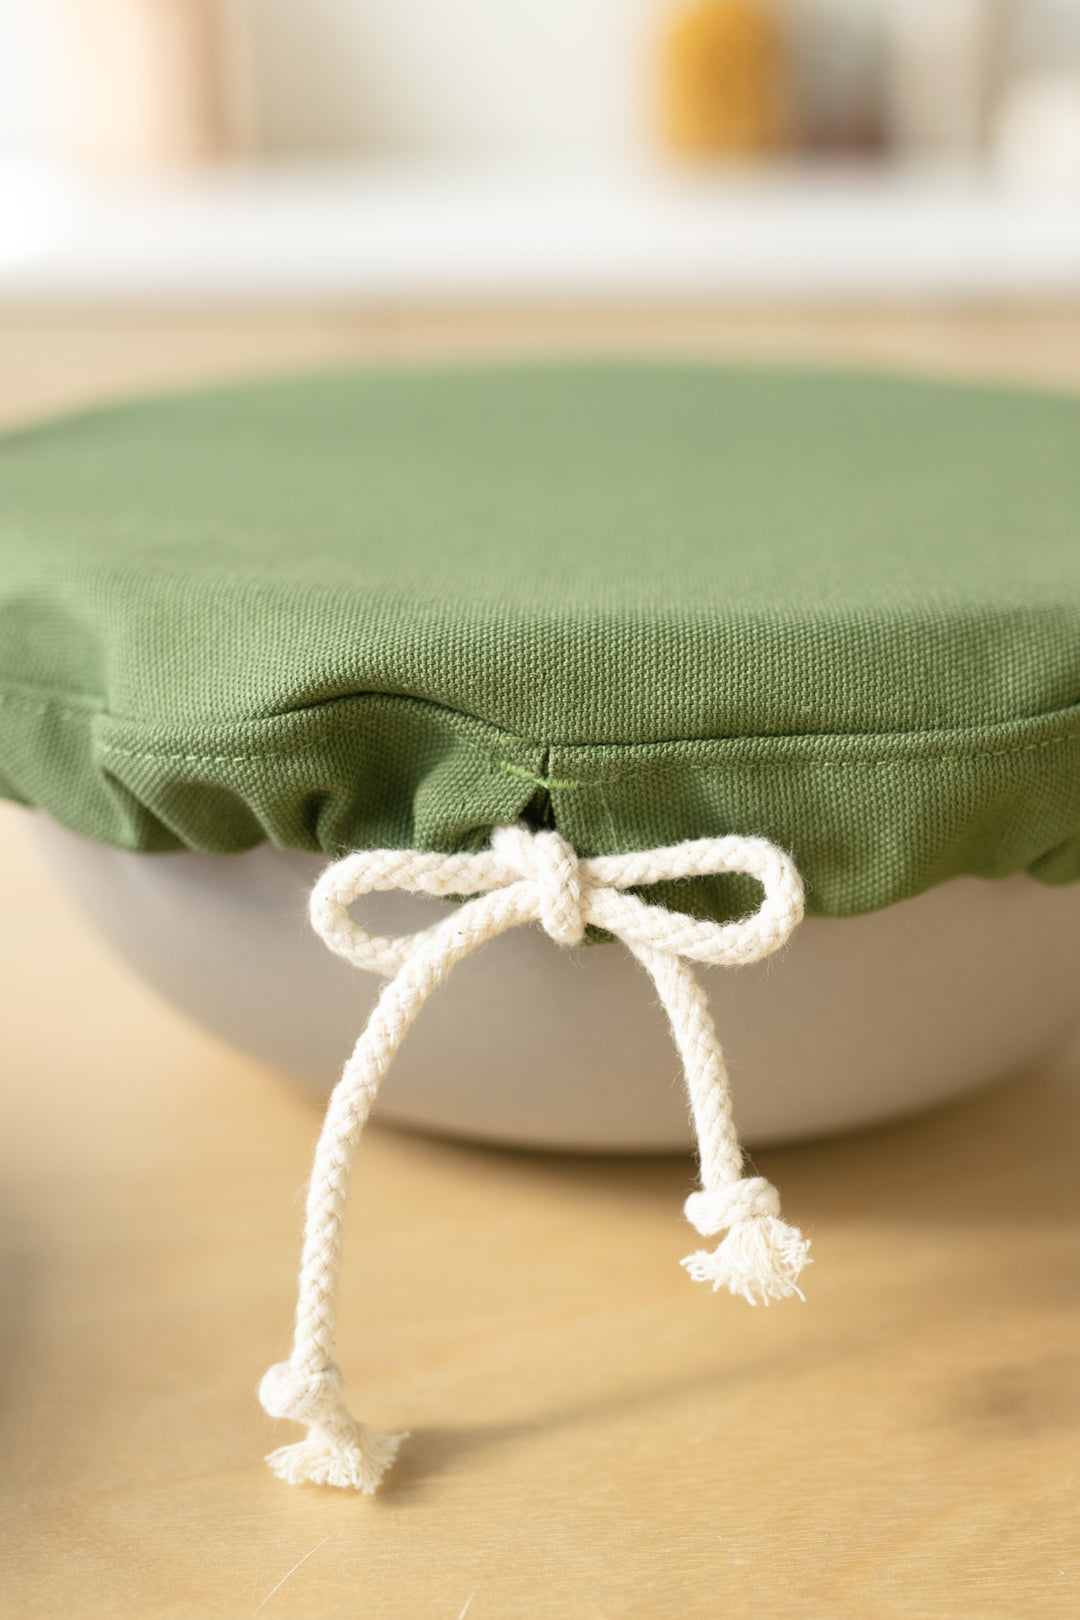 Couvre-Plat Medium Bowl Cover | Olive